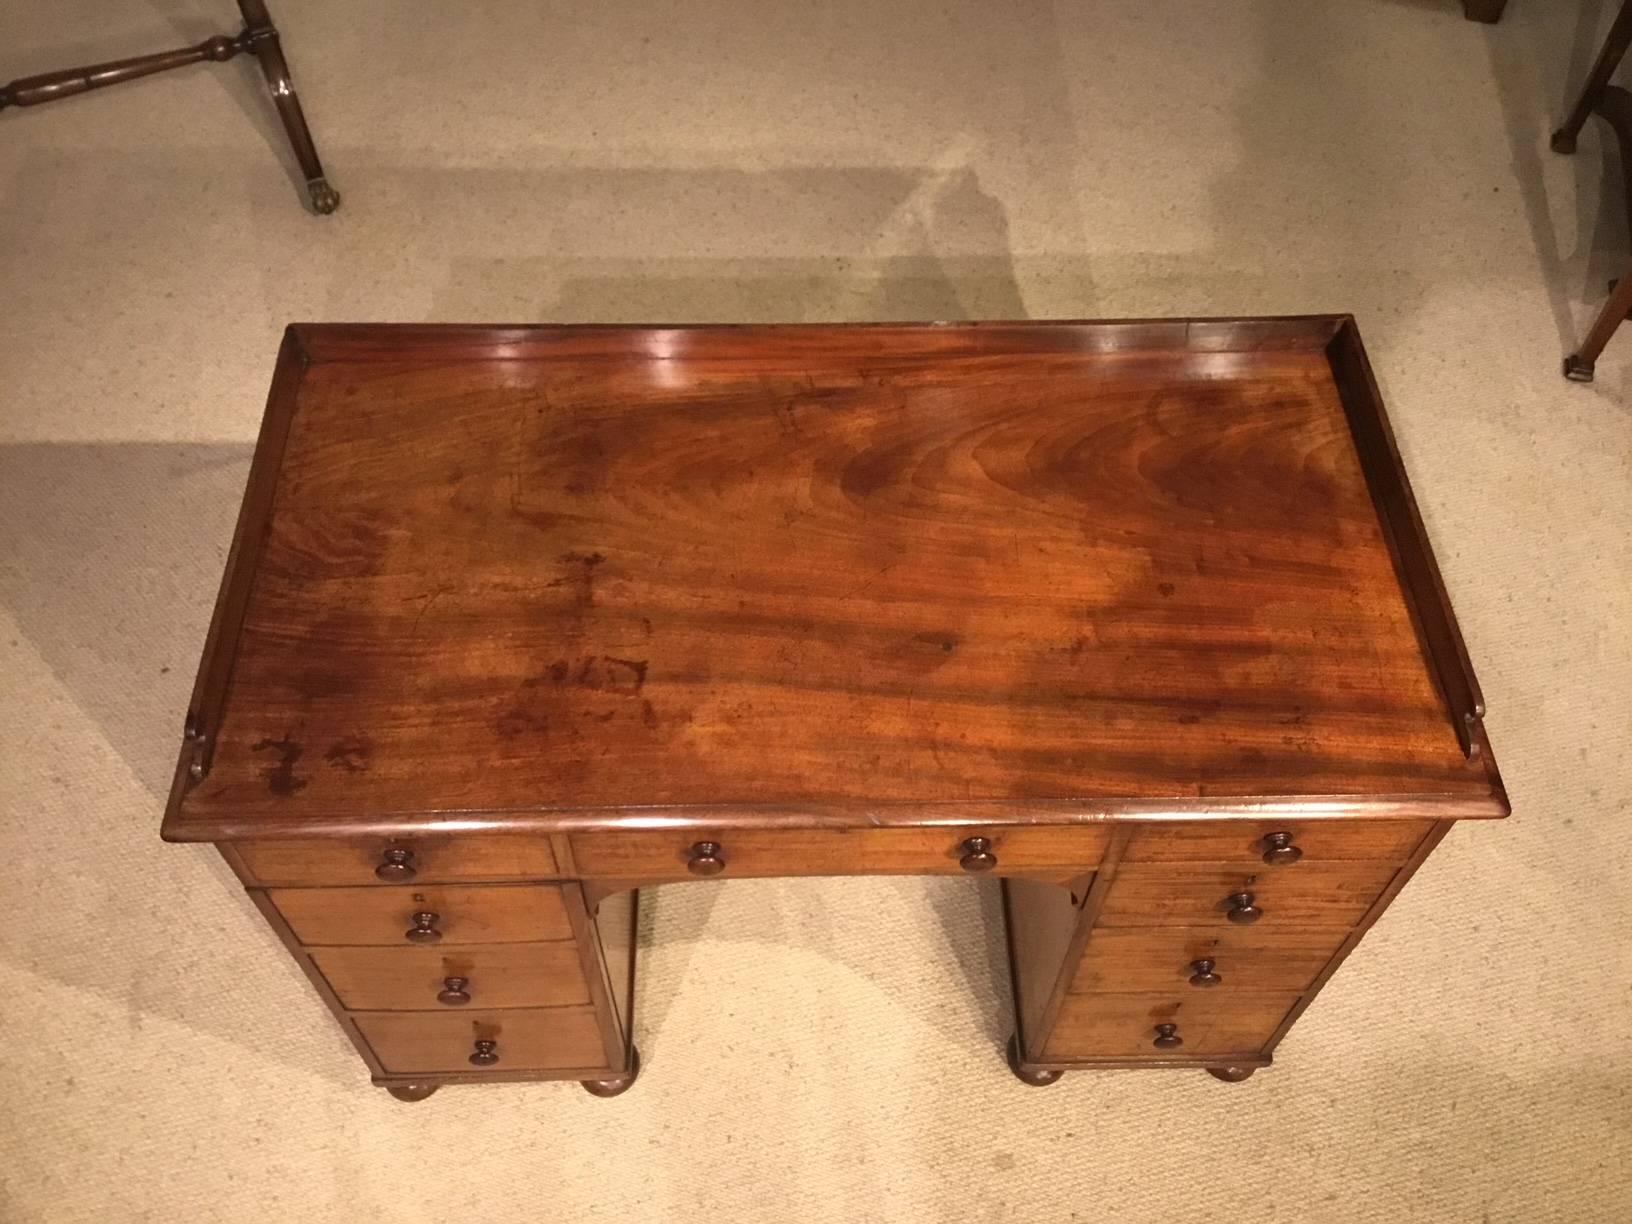 A mahogany early Victorian period writing desk. Having a solid figured mahogany rectangular top with a raised gallery and a moulded edge. With an arrangement of six mahogany lined drawers with one rectangular cupboard with 